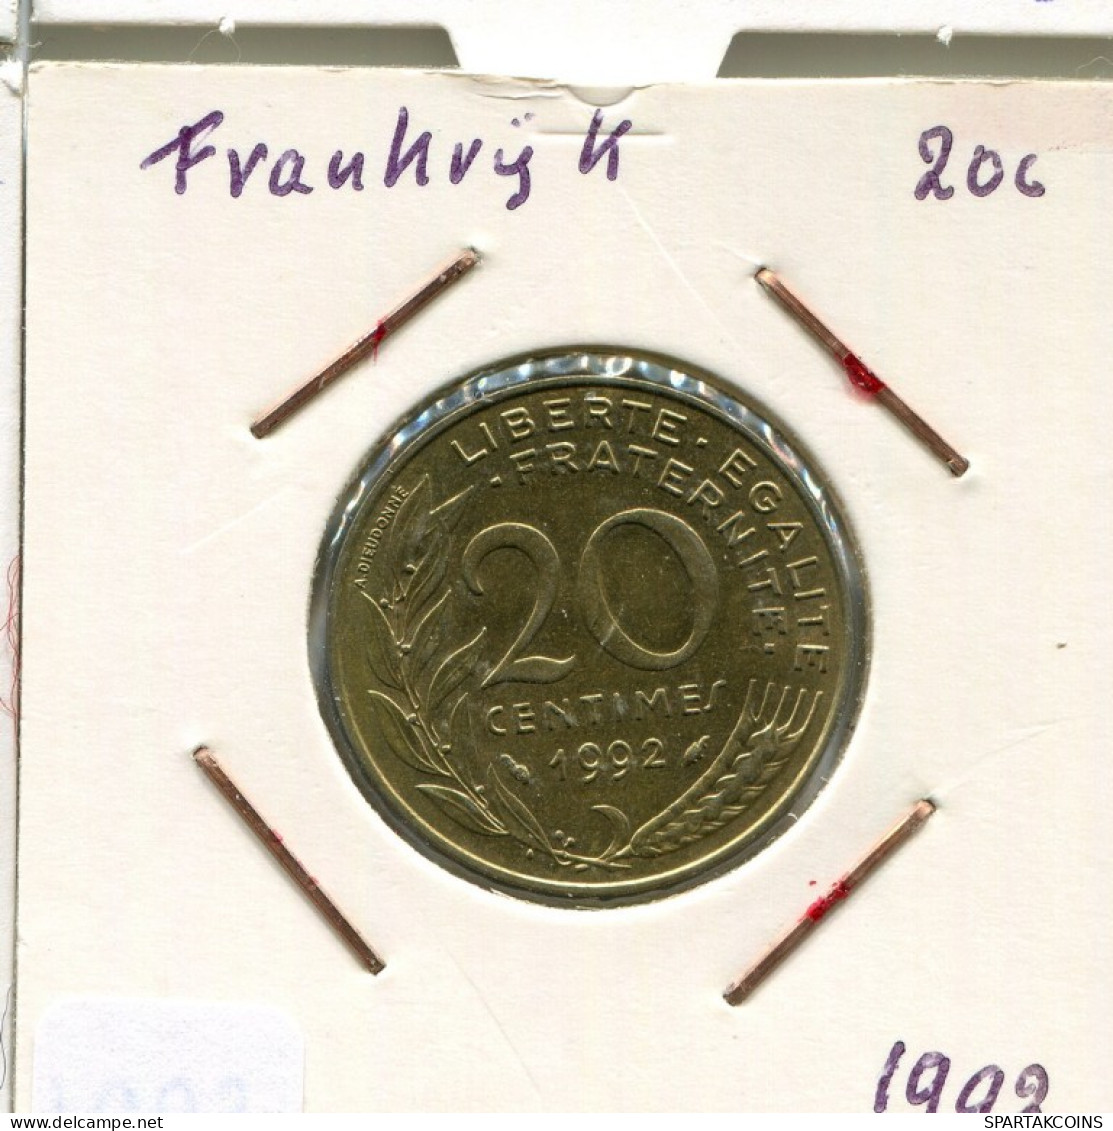 20 CENTIMES 1992 FRANCE Coin French Coin #AM873.U.A - 20 Centimes